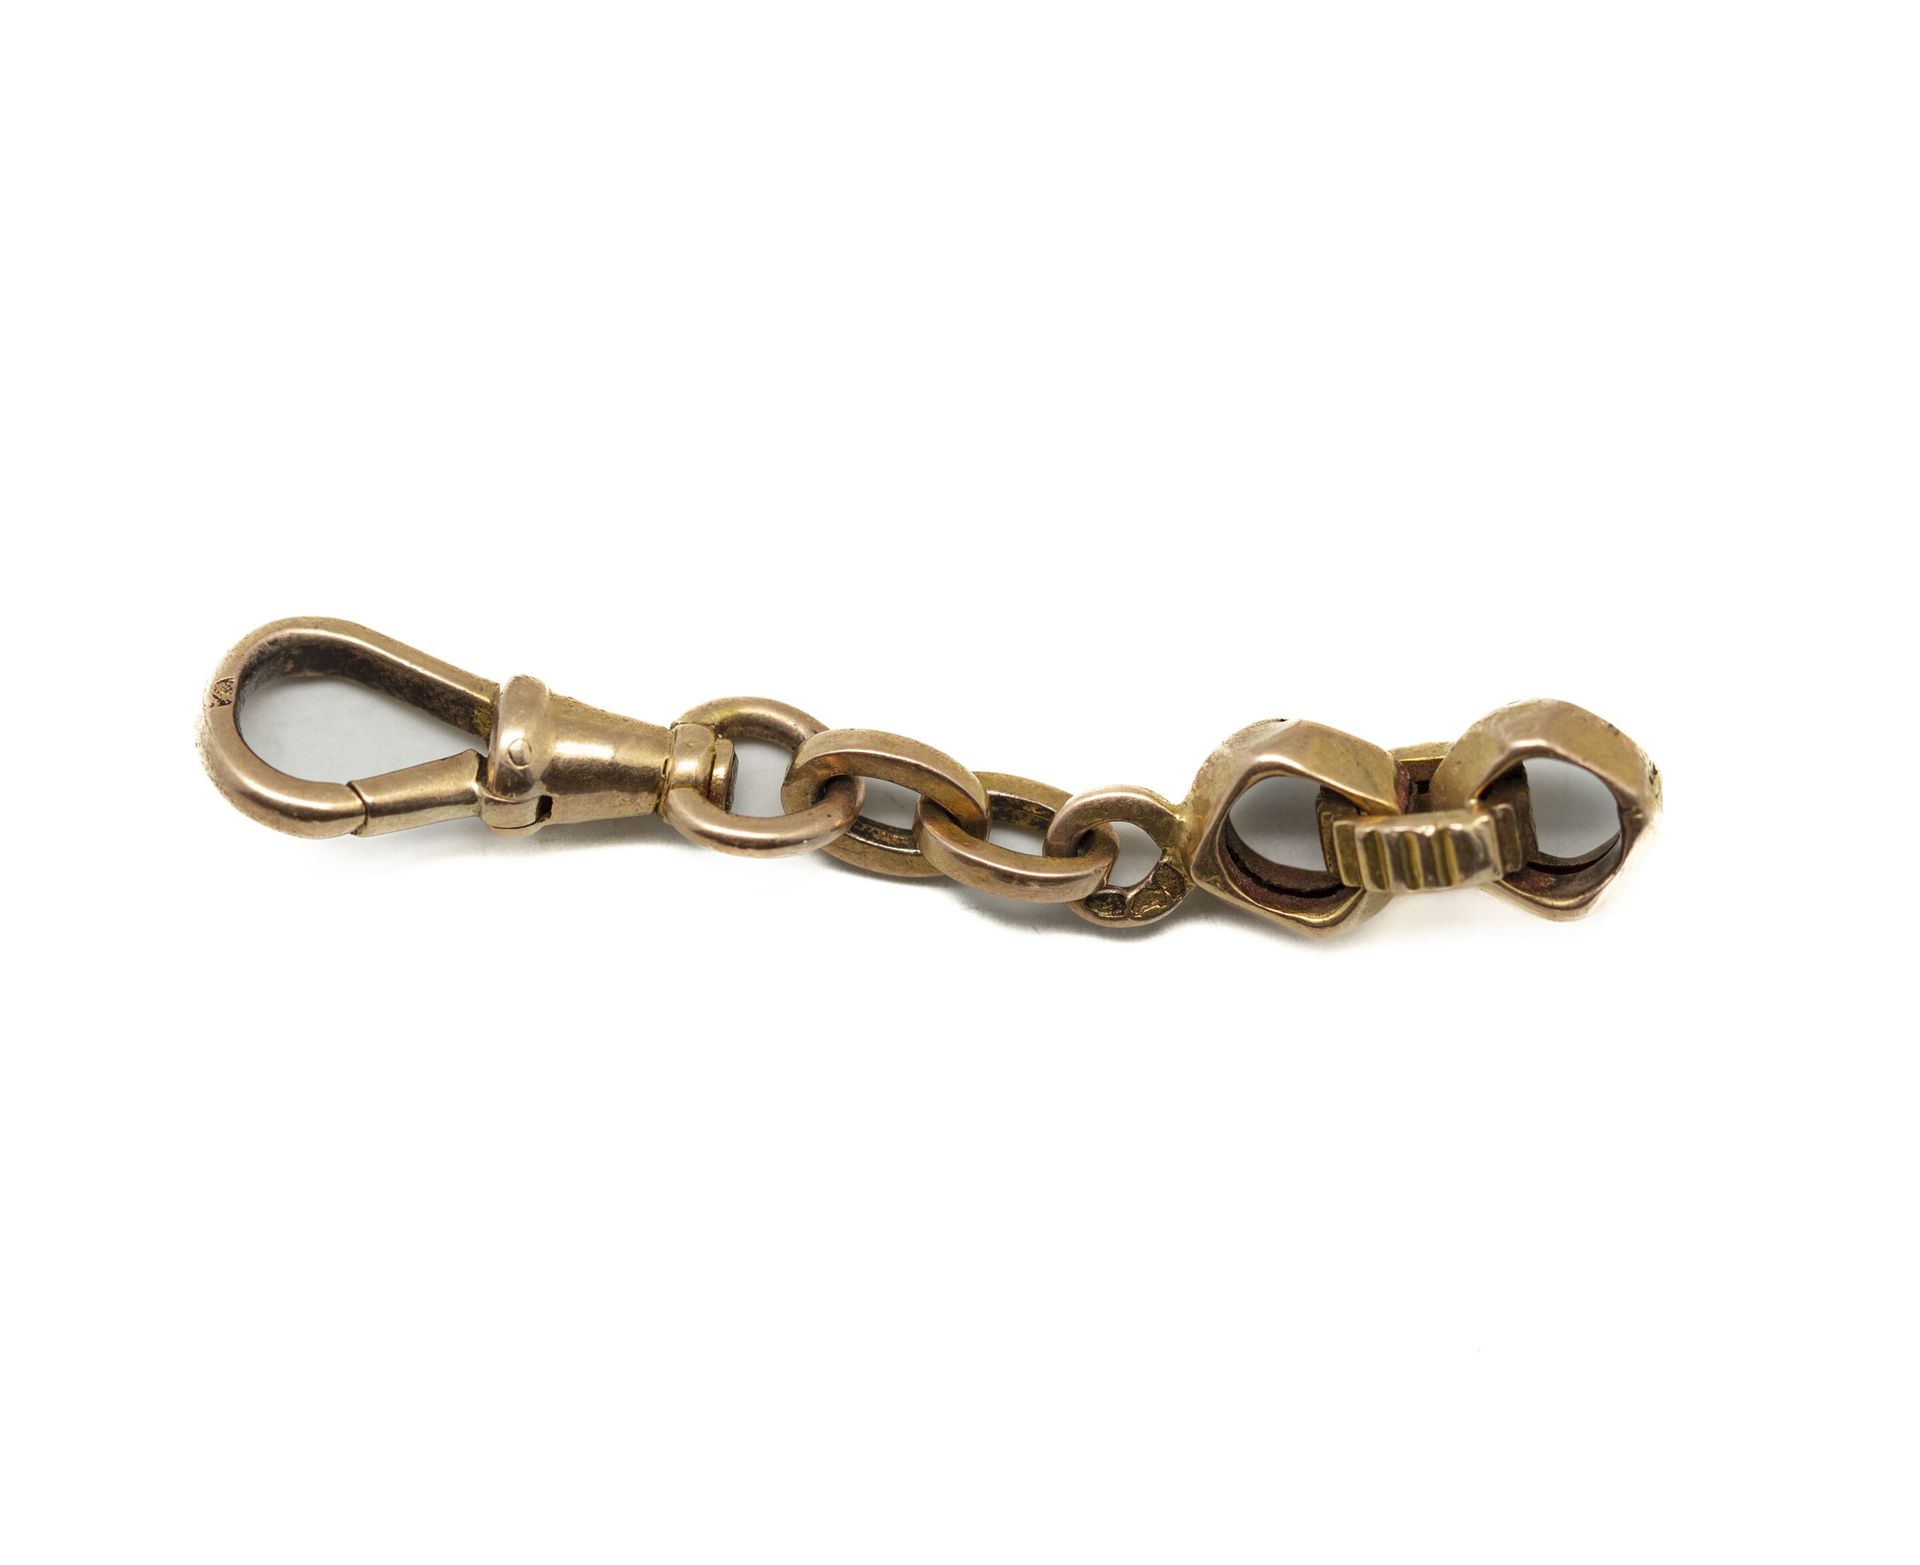 Null Element of gold watch chain.
Weight : 2,7 g.